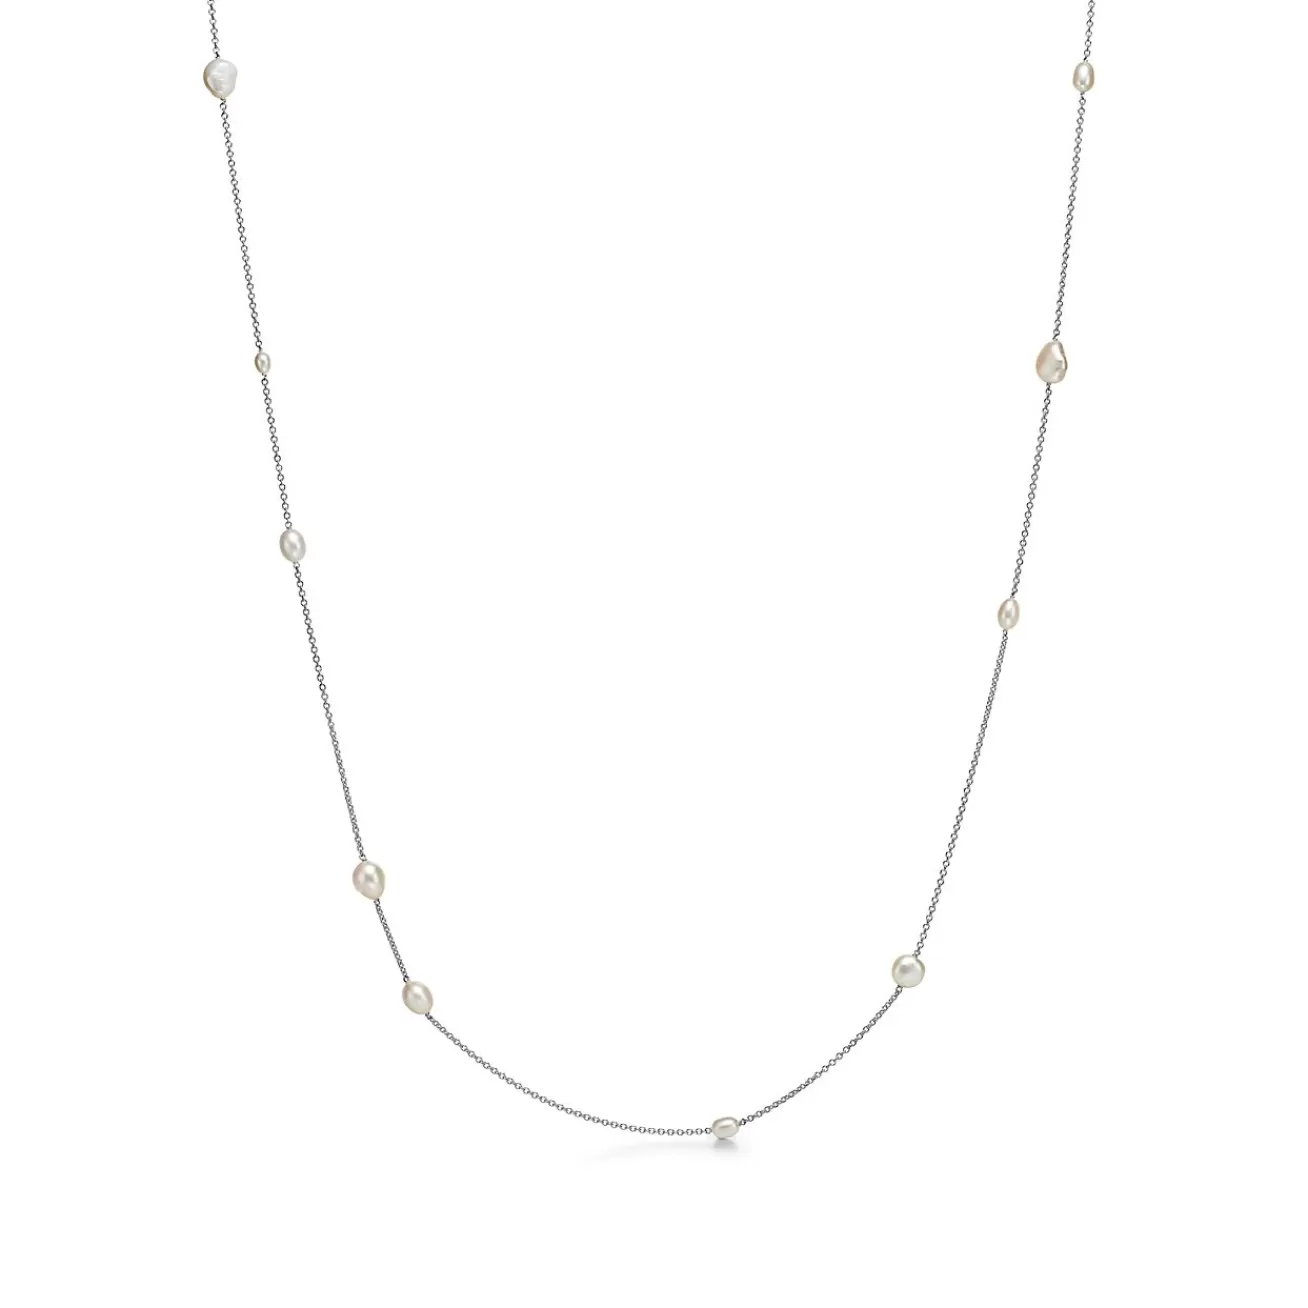 Tiffany & Co. Elsa Peretti® Pearls by the Yard™ sprinkle necklace in sterling silver. | ^ Necklaces & Pendants | Sterling Silver Jewelry